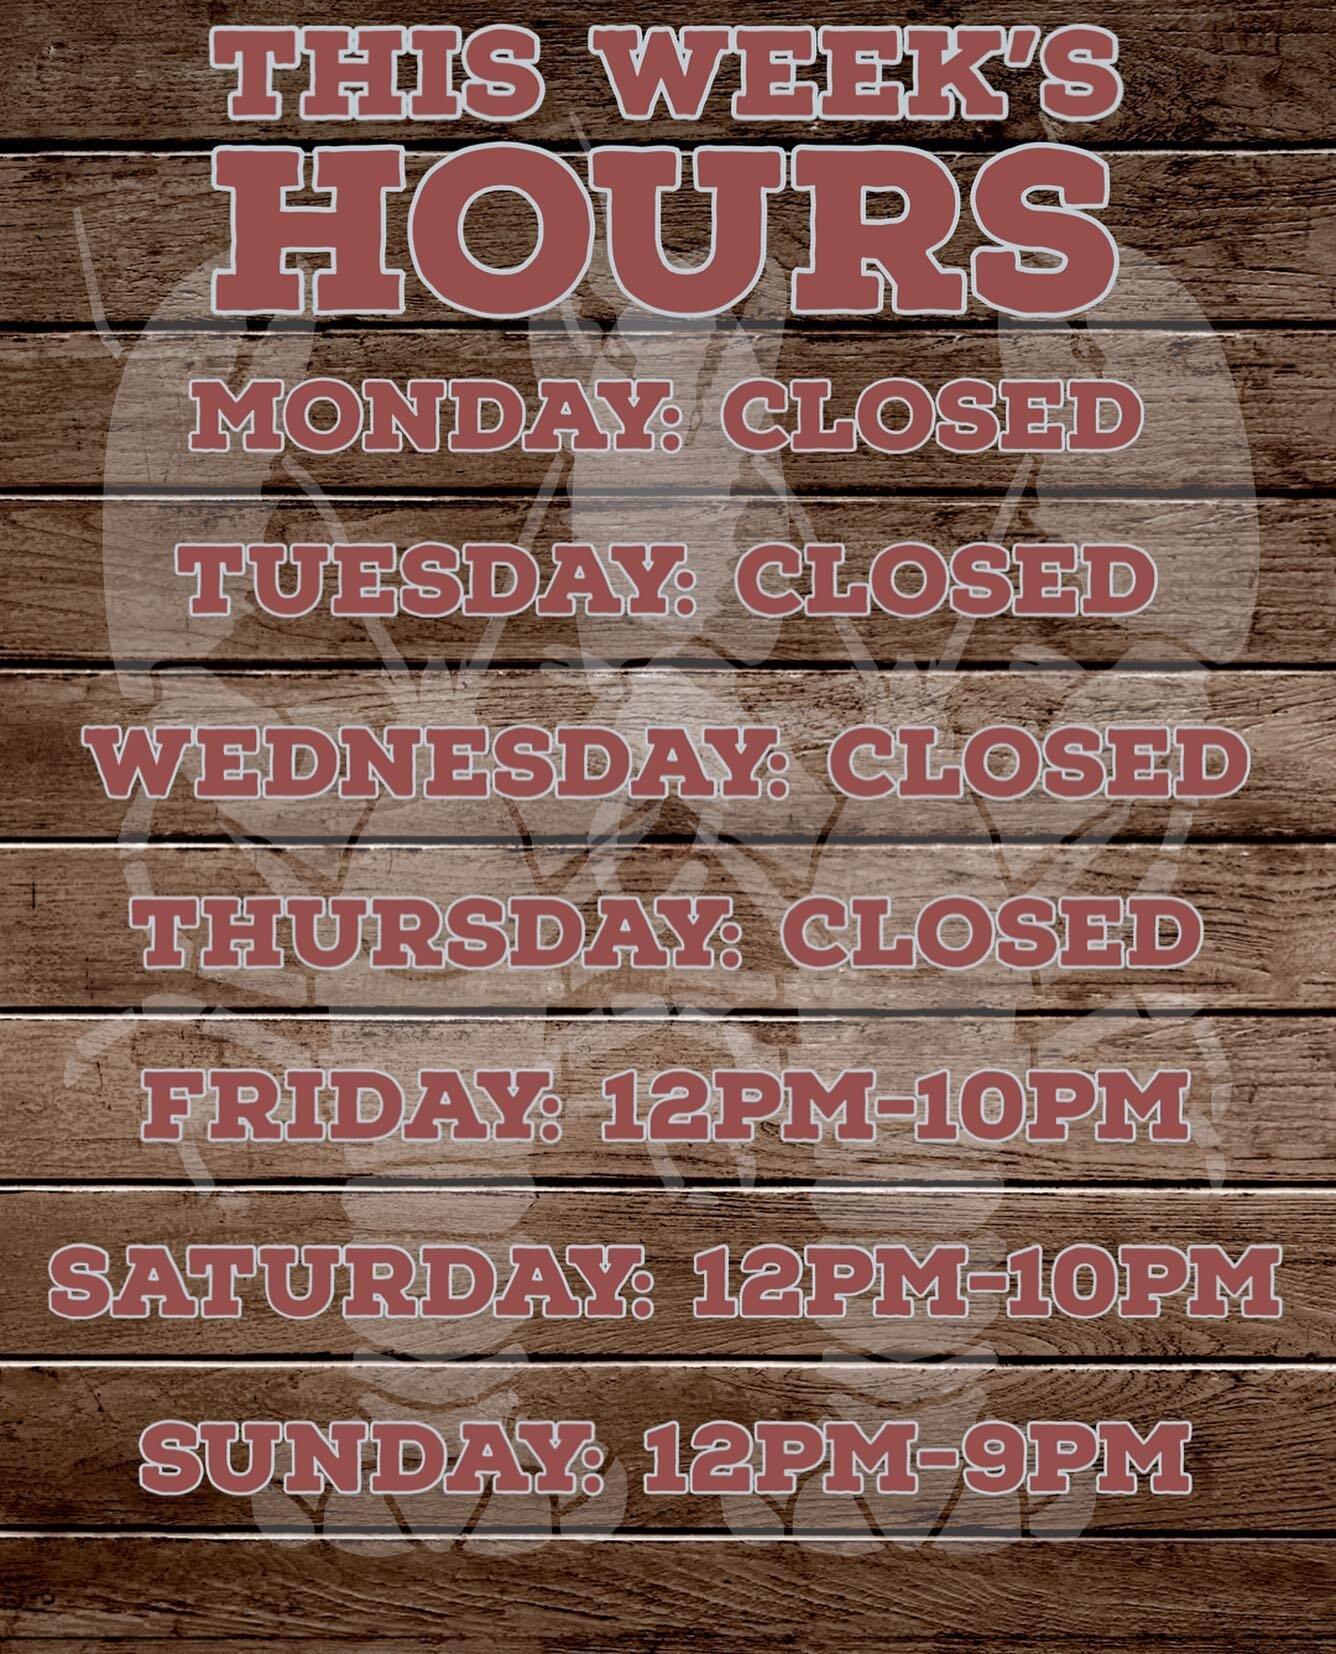 ❗️Updated hours❗️
We are transitioning into our Fall hours starting this week. We will still have music each weekend, so make sure to follow along! 🦞